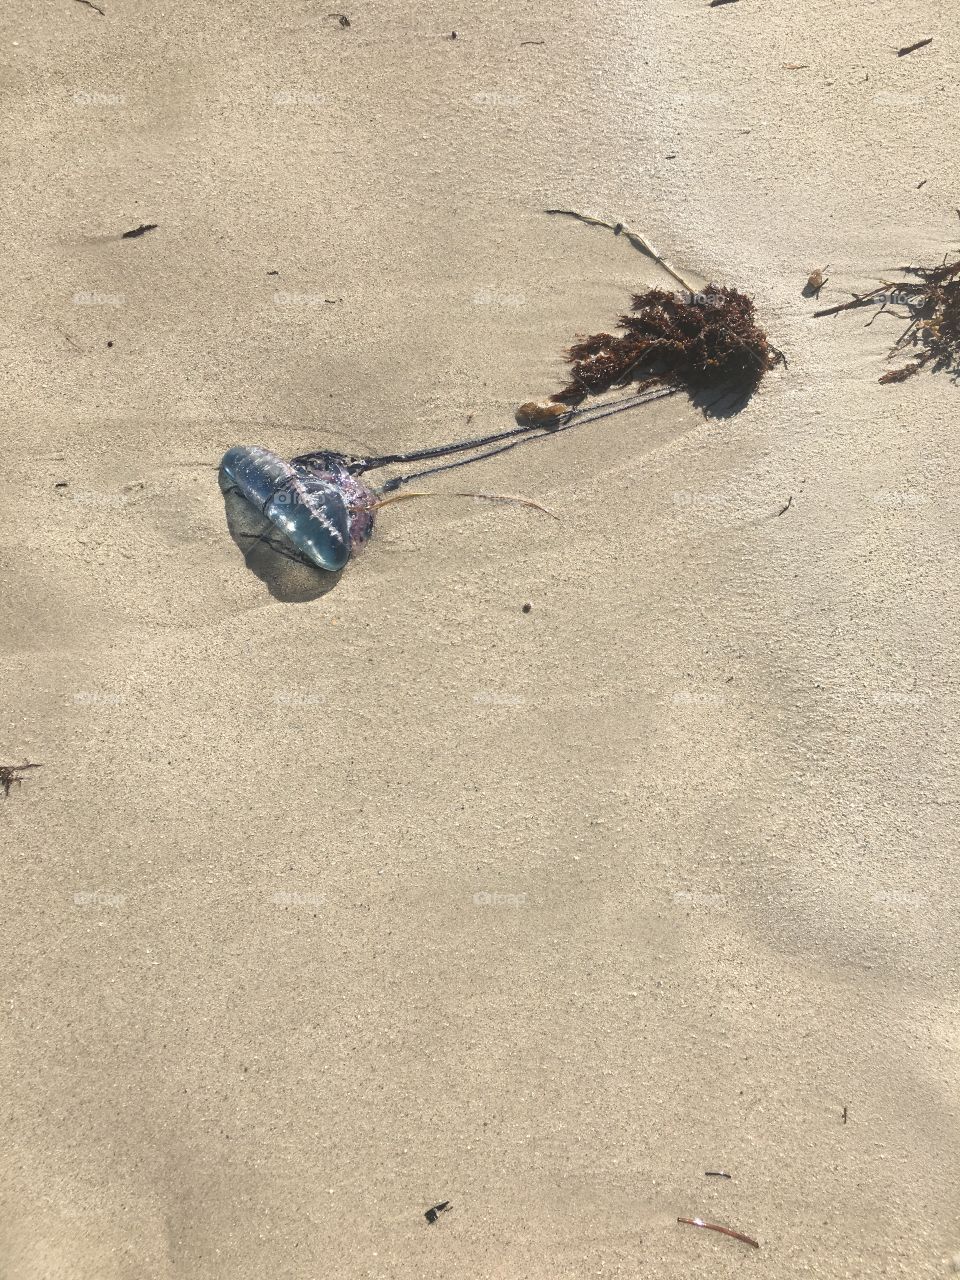 Teal and purple Jellyfish washed ashore. 